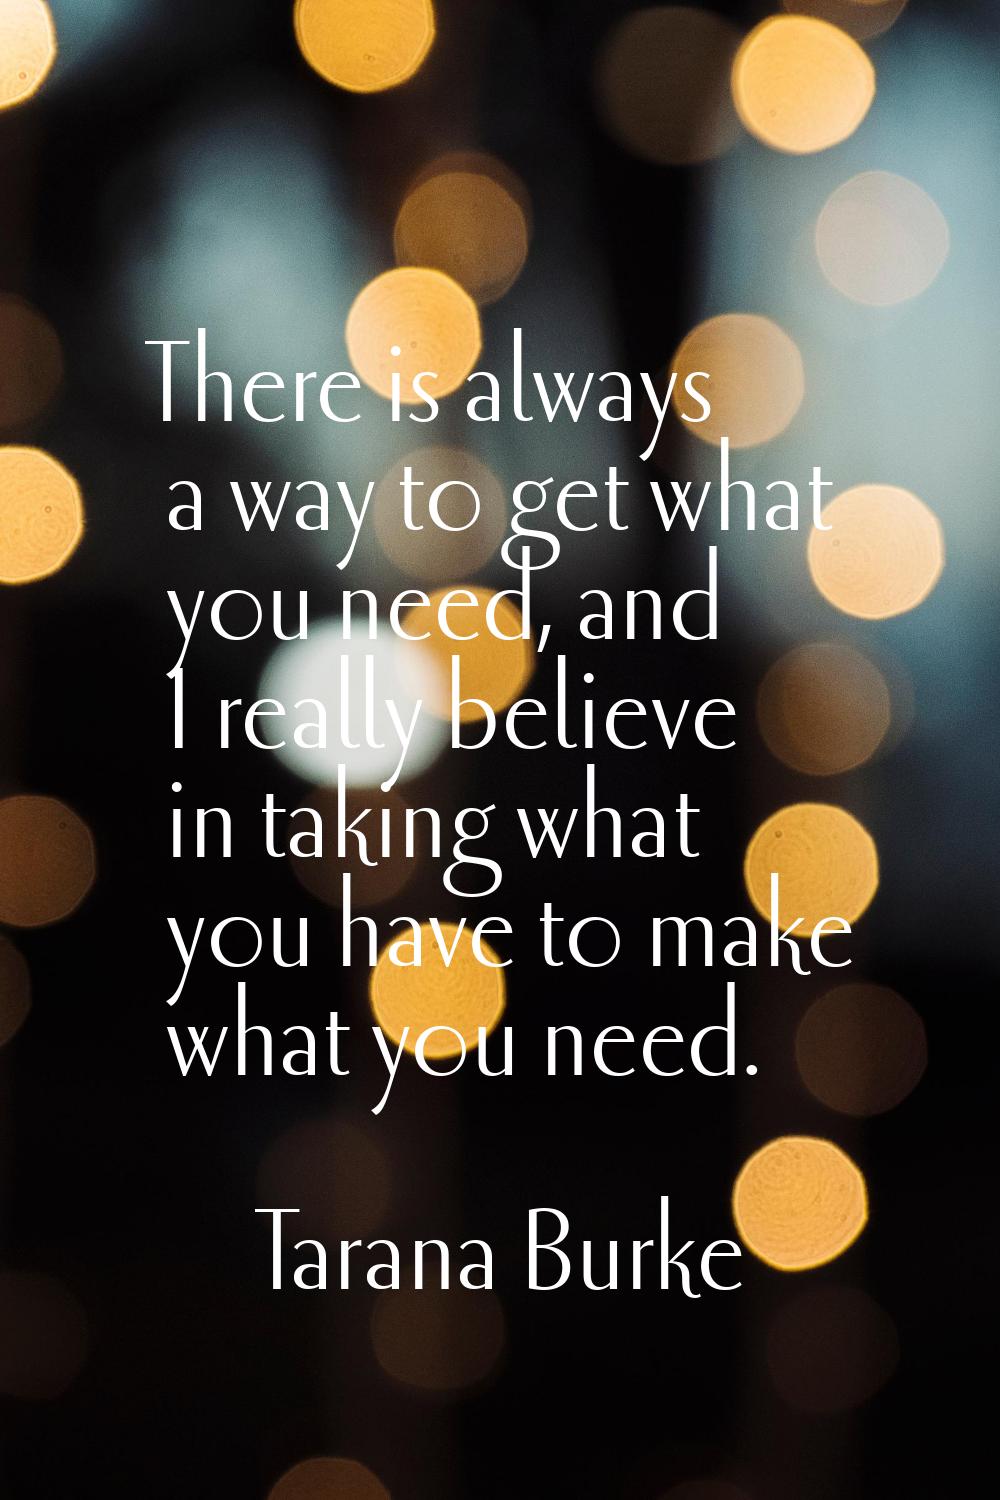 There is always a way to get what you need, and I really believe in taking what you have to make wh